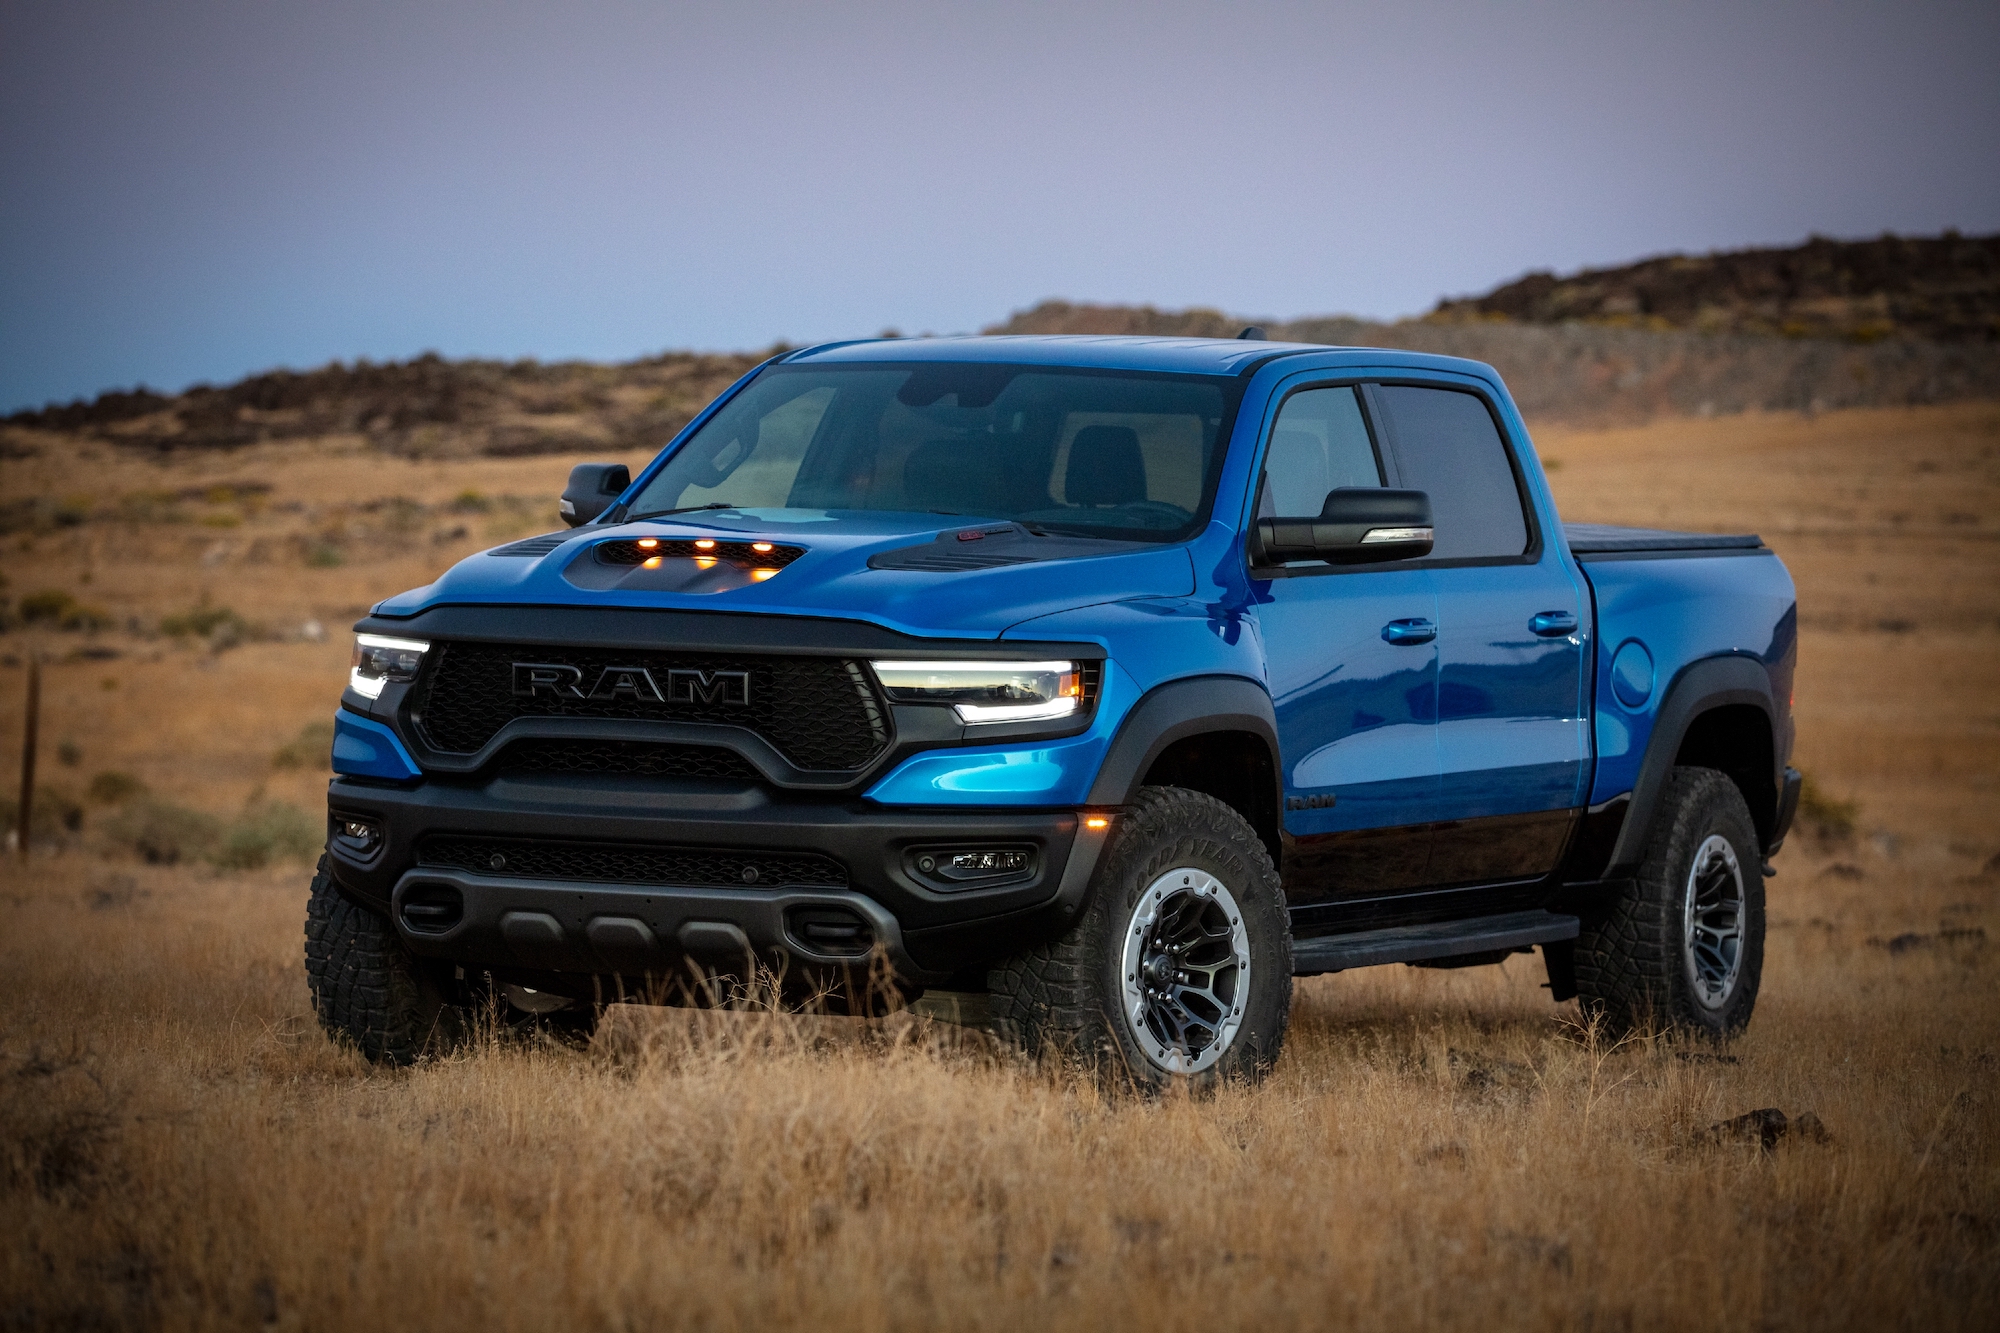 A metallic blue 2021 Ram 1500 TRX parked in a field of brown grass and weeds